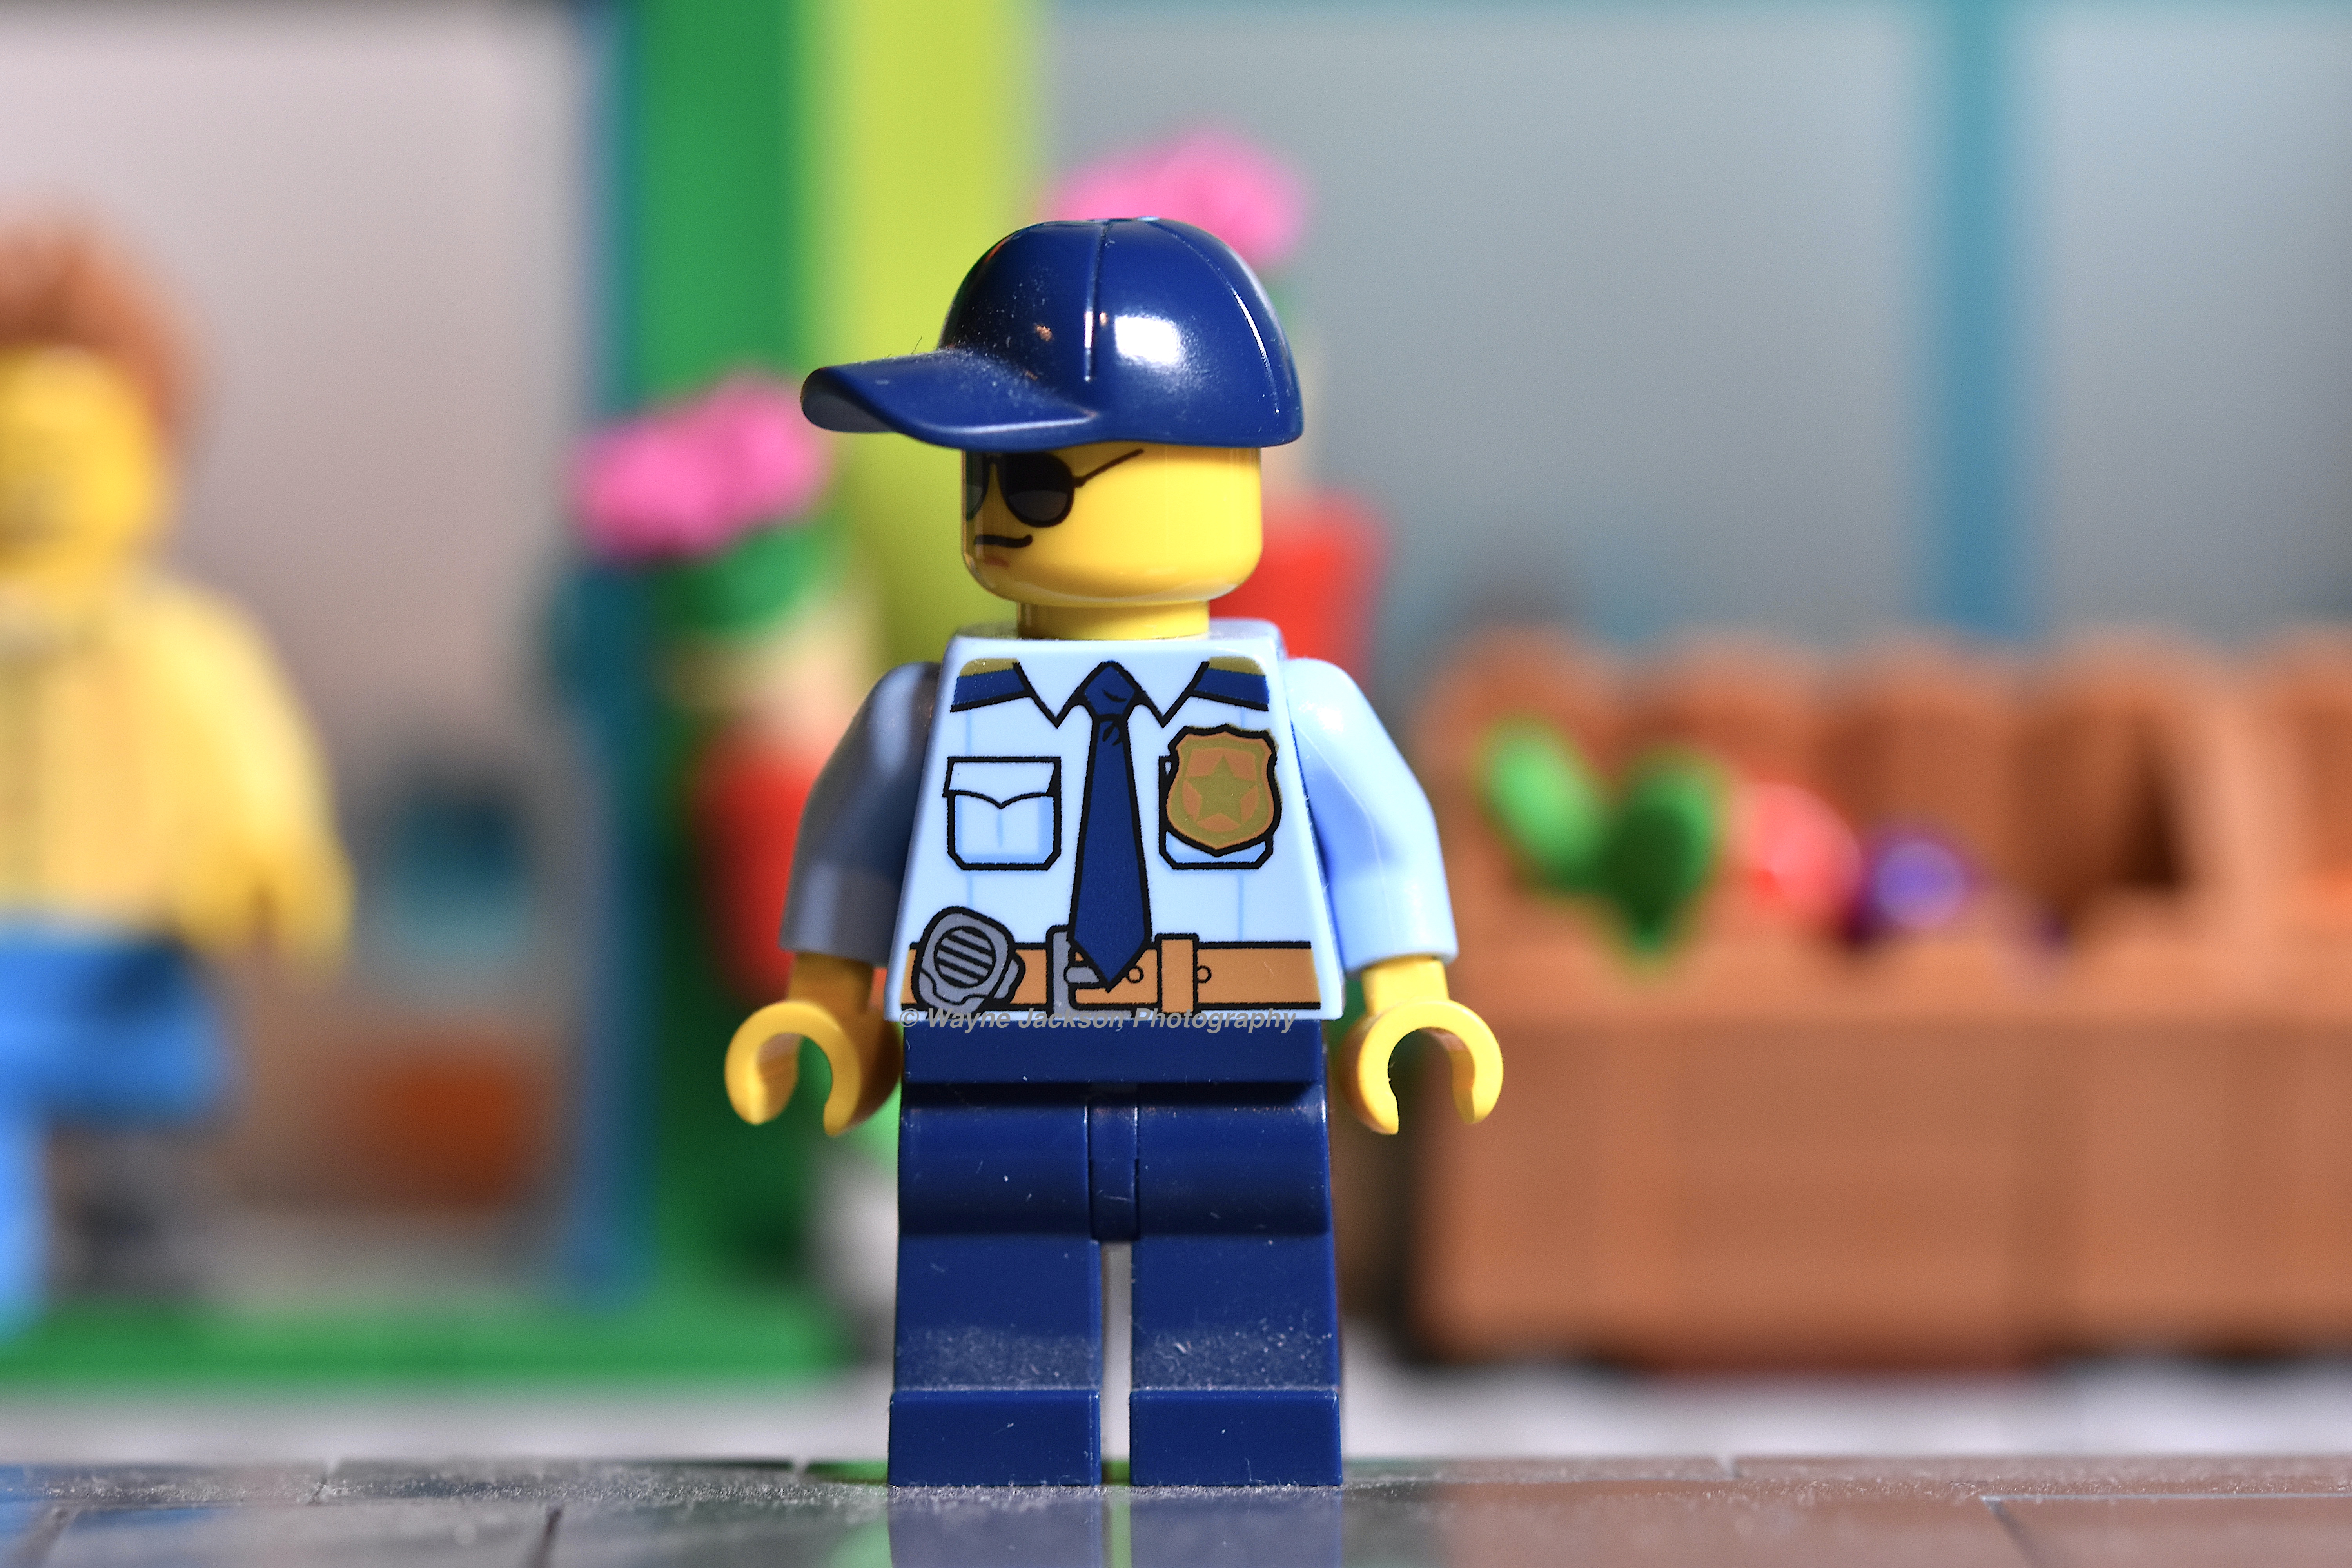 Lego police man minifigure (found in several sets)